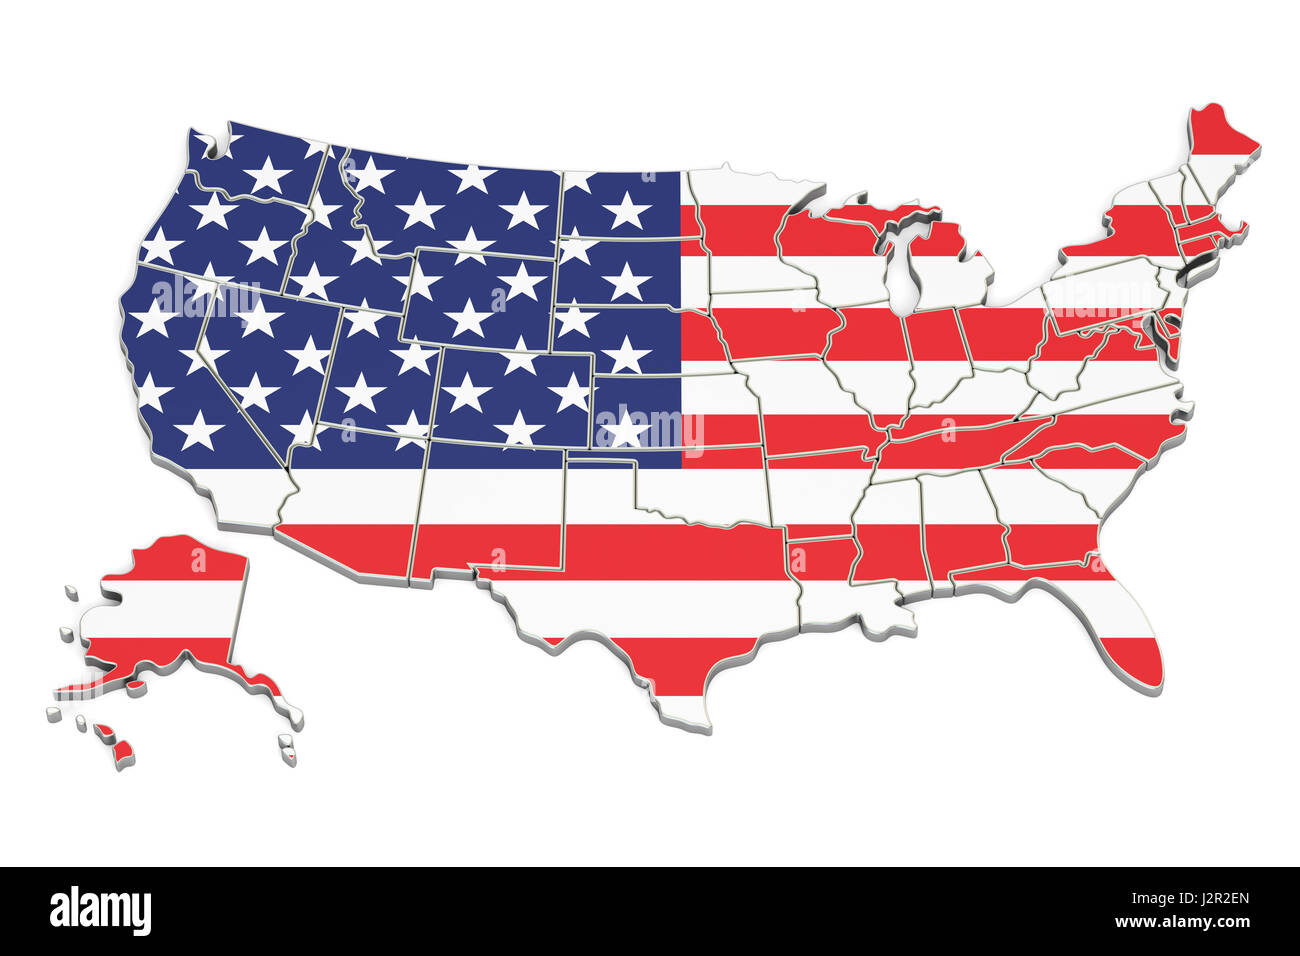 United States of America map, 3D rendering isolated on white background Stock Photo